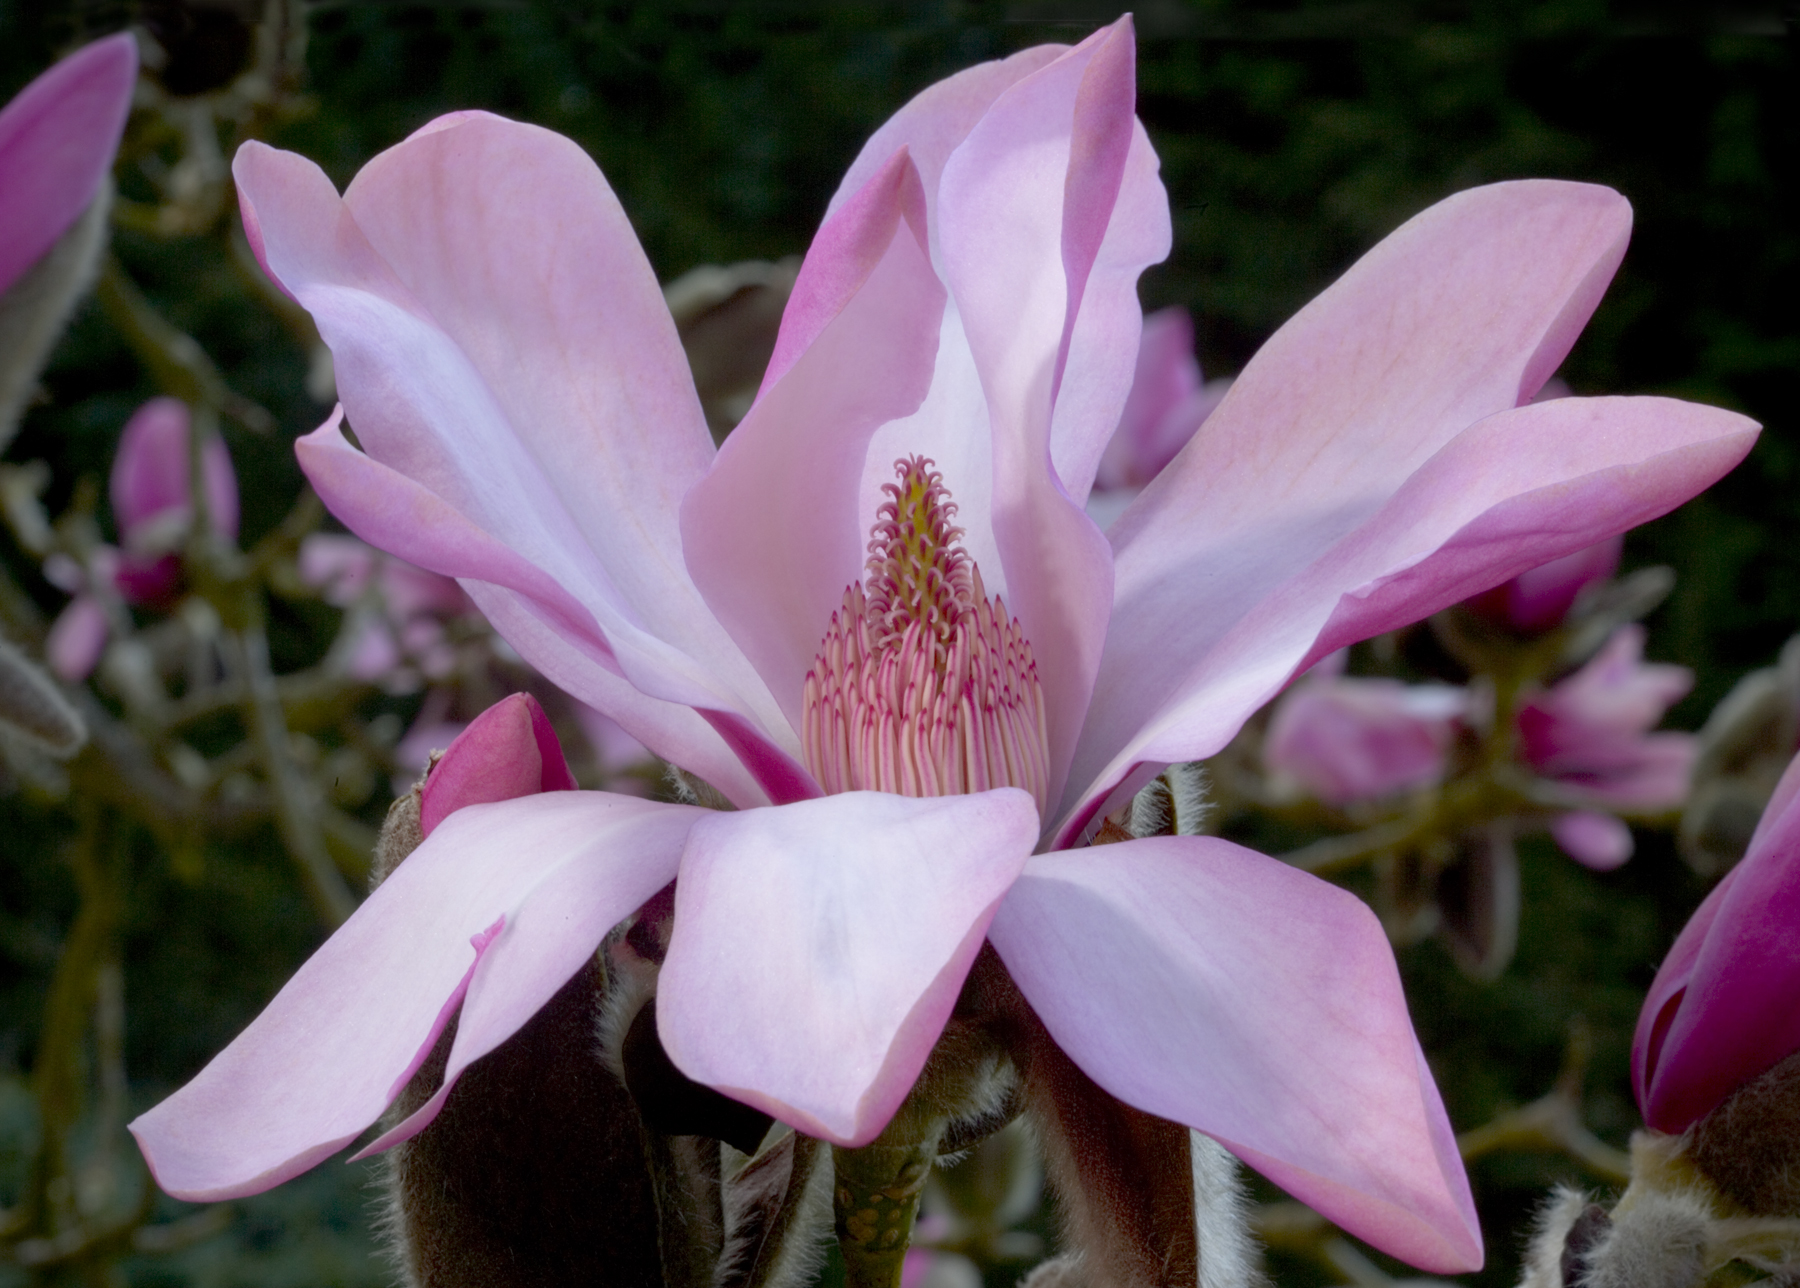 A close up of a large rich pink magnolia flower.